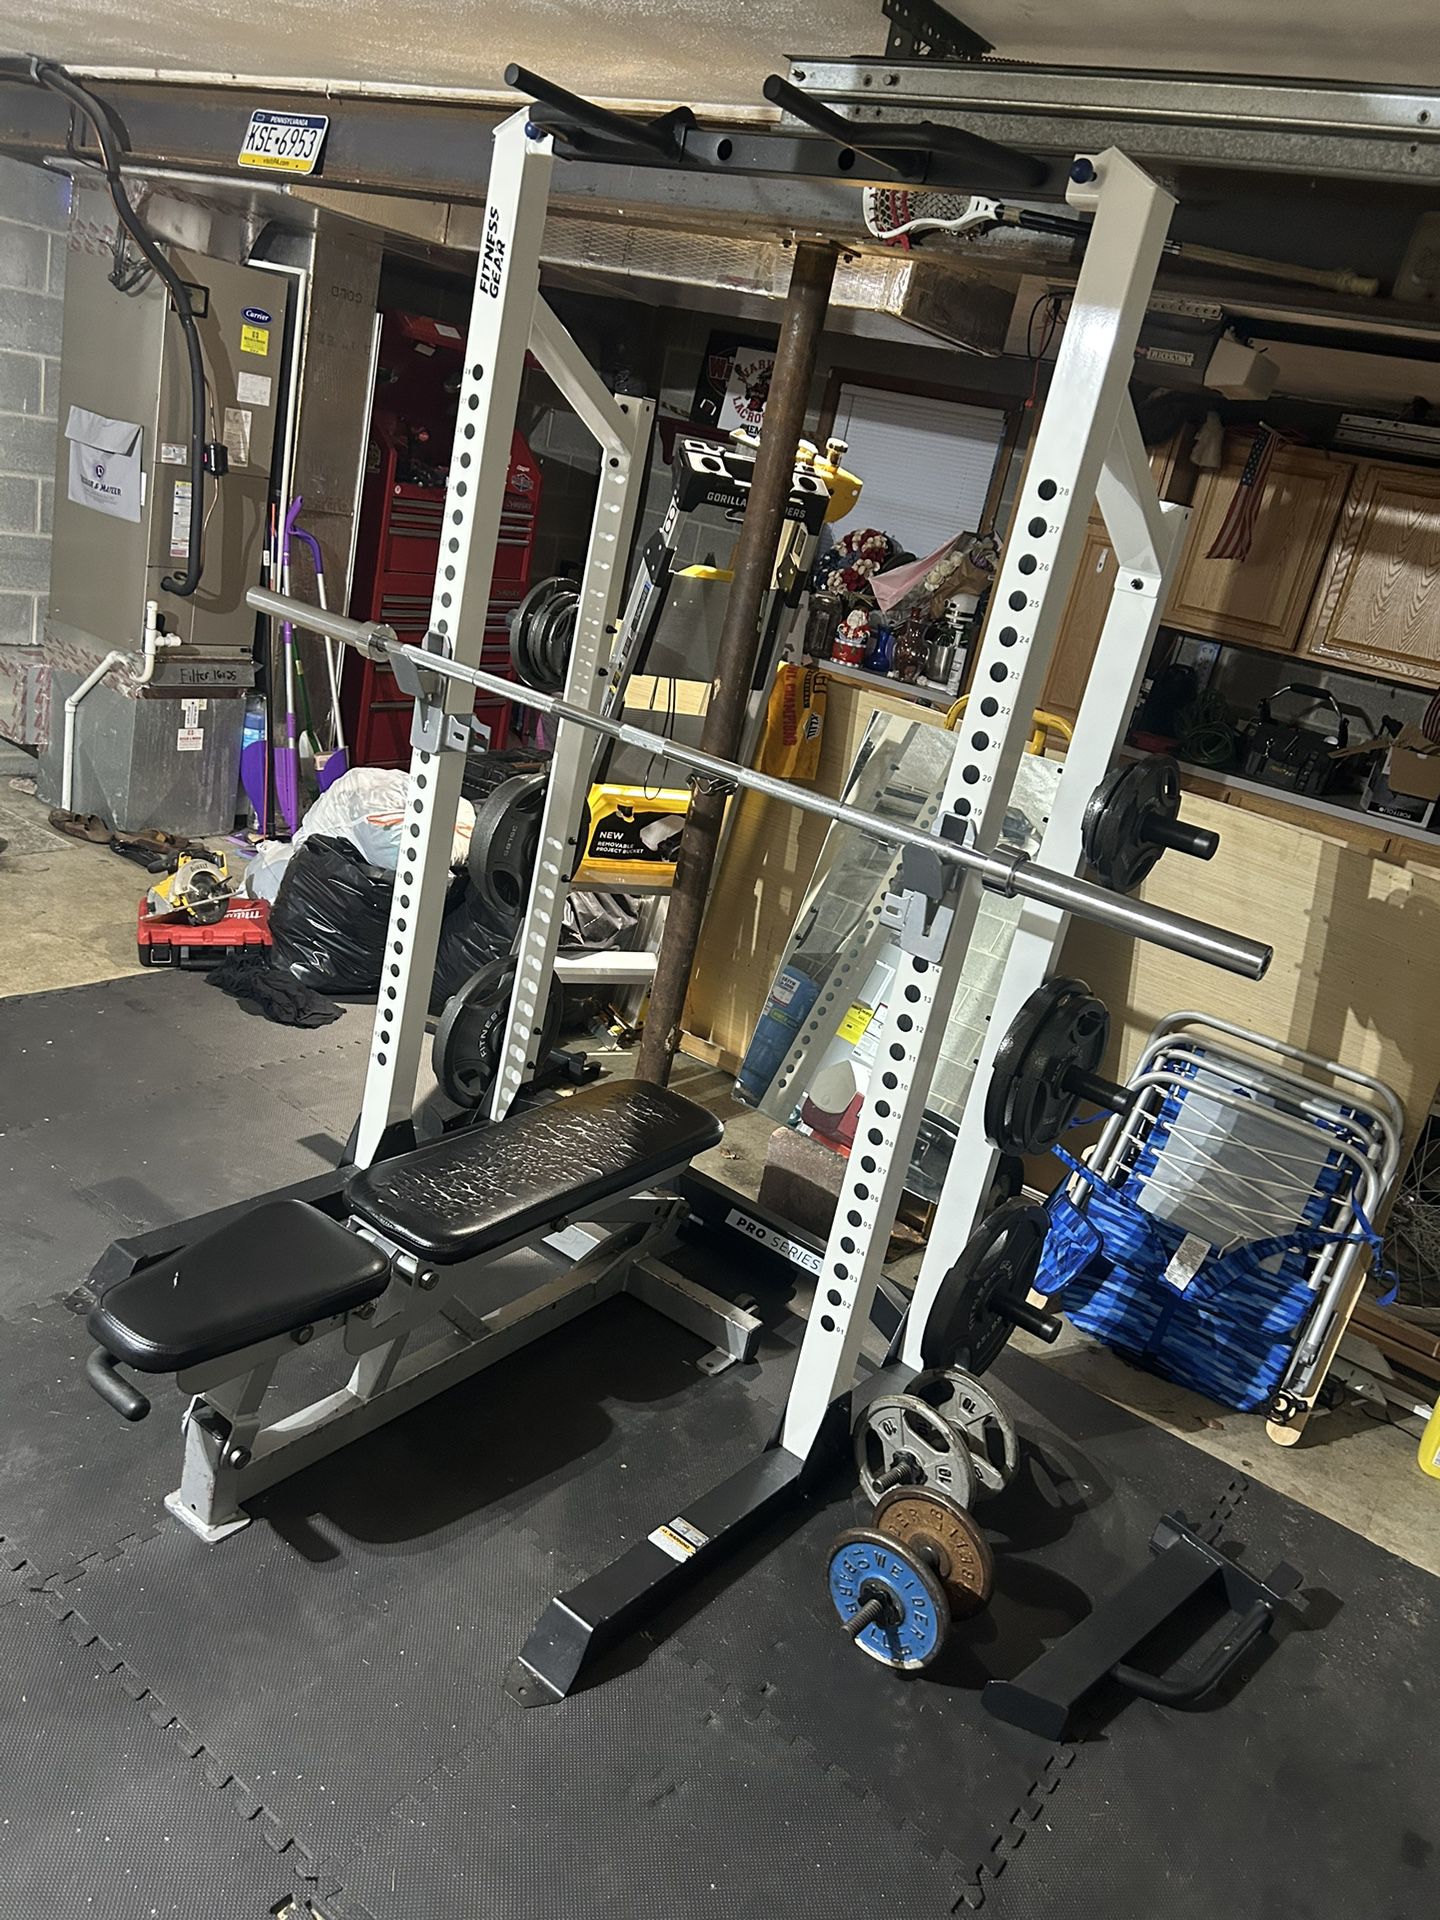 Weight Rack With 300lbs And Bench